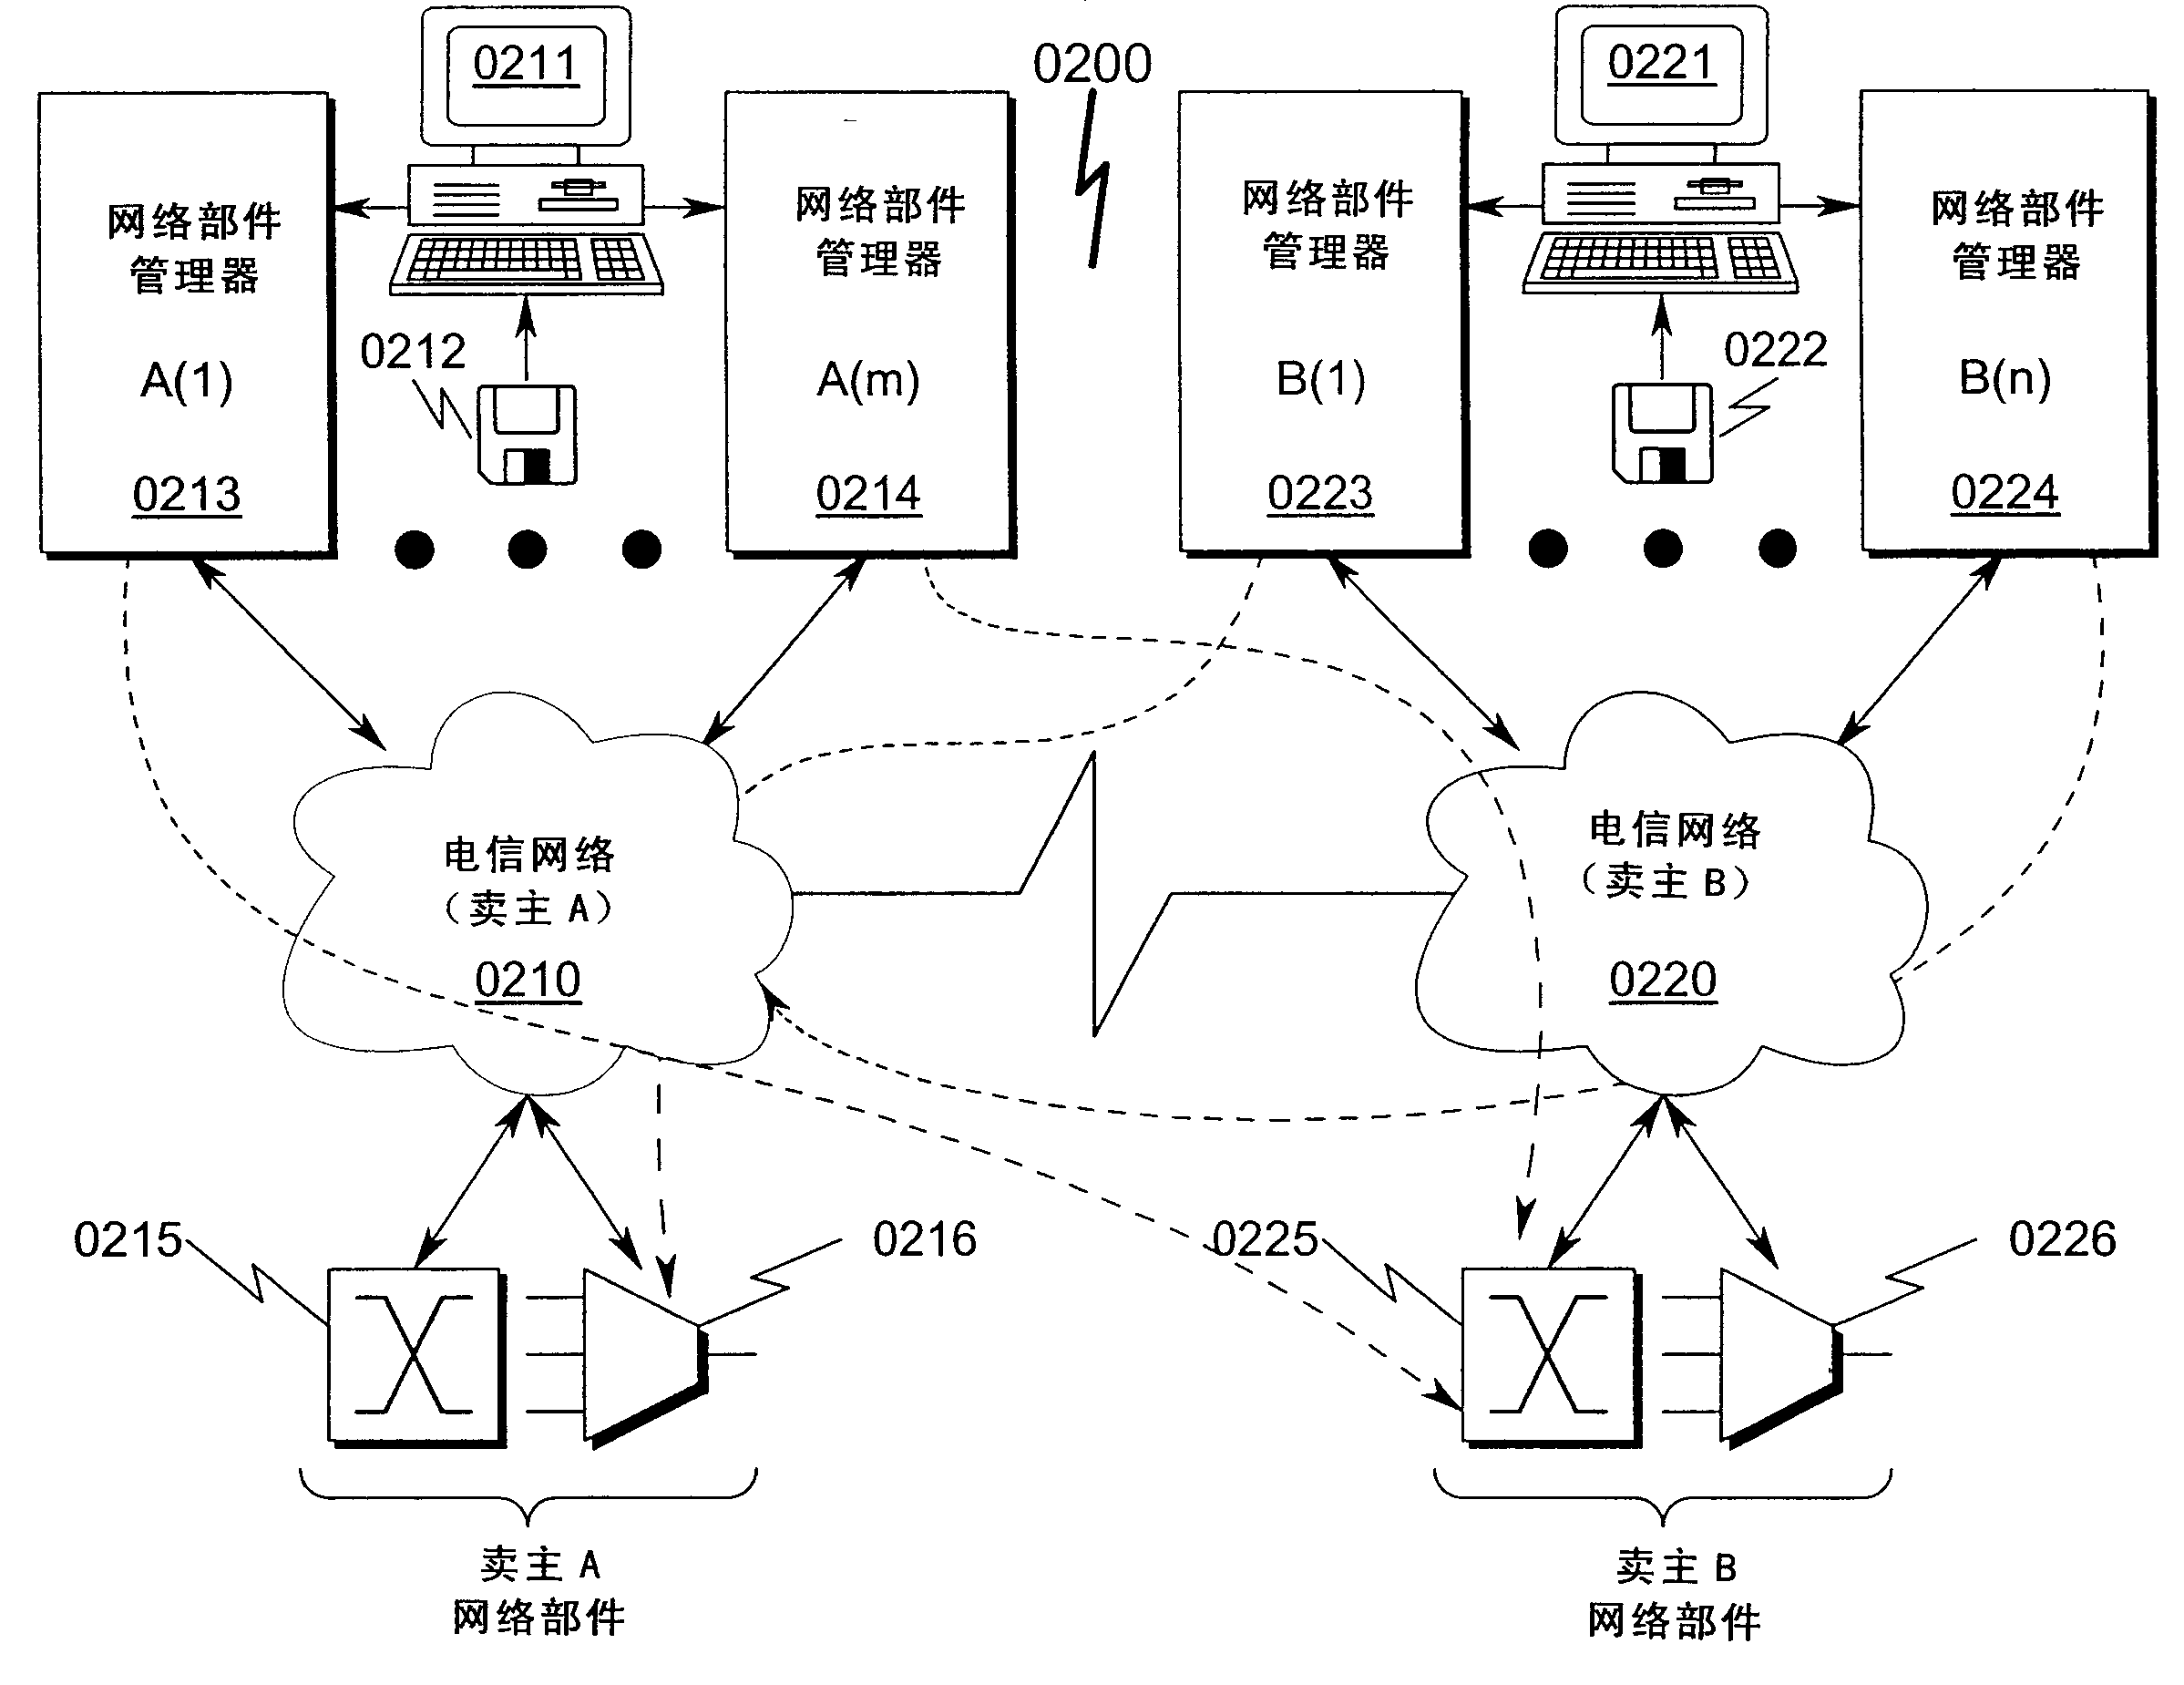 External event processor system and method